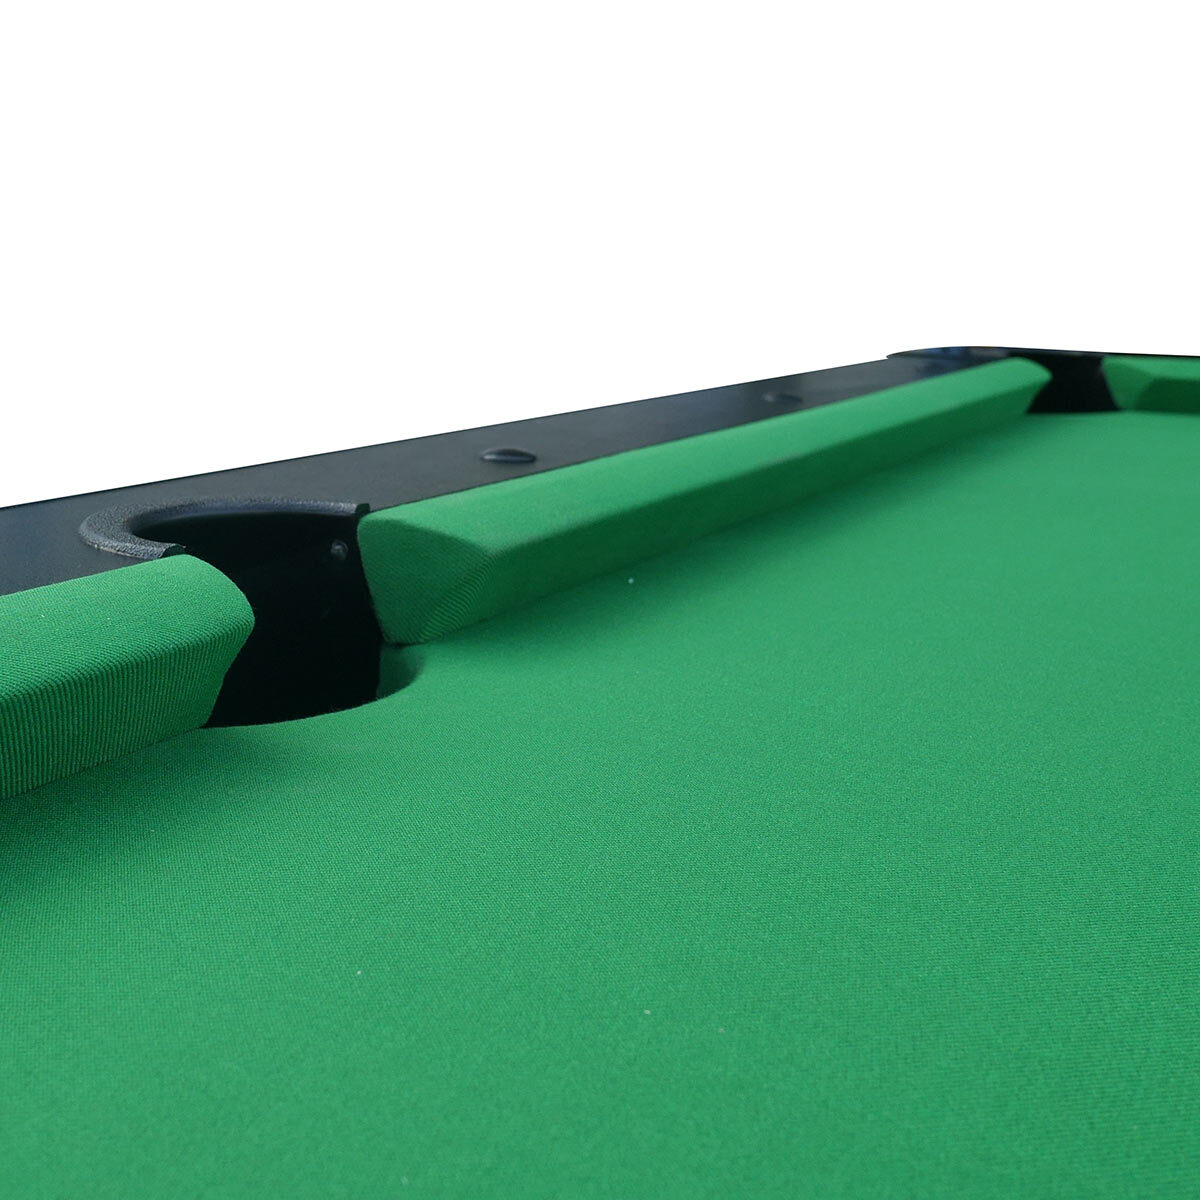 Installed Roberto Sport 7ft First Slate Pool Table